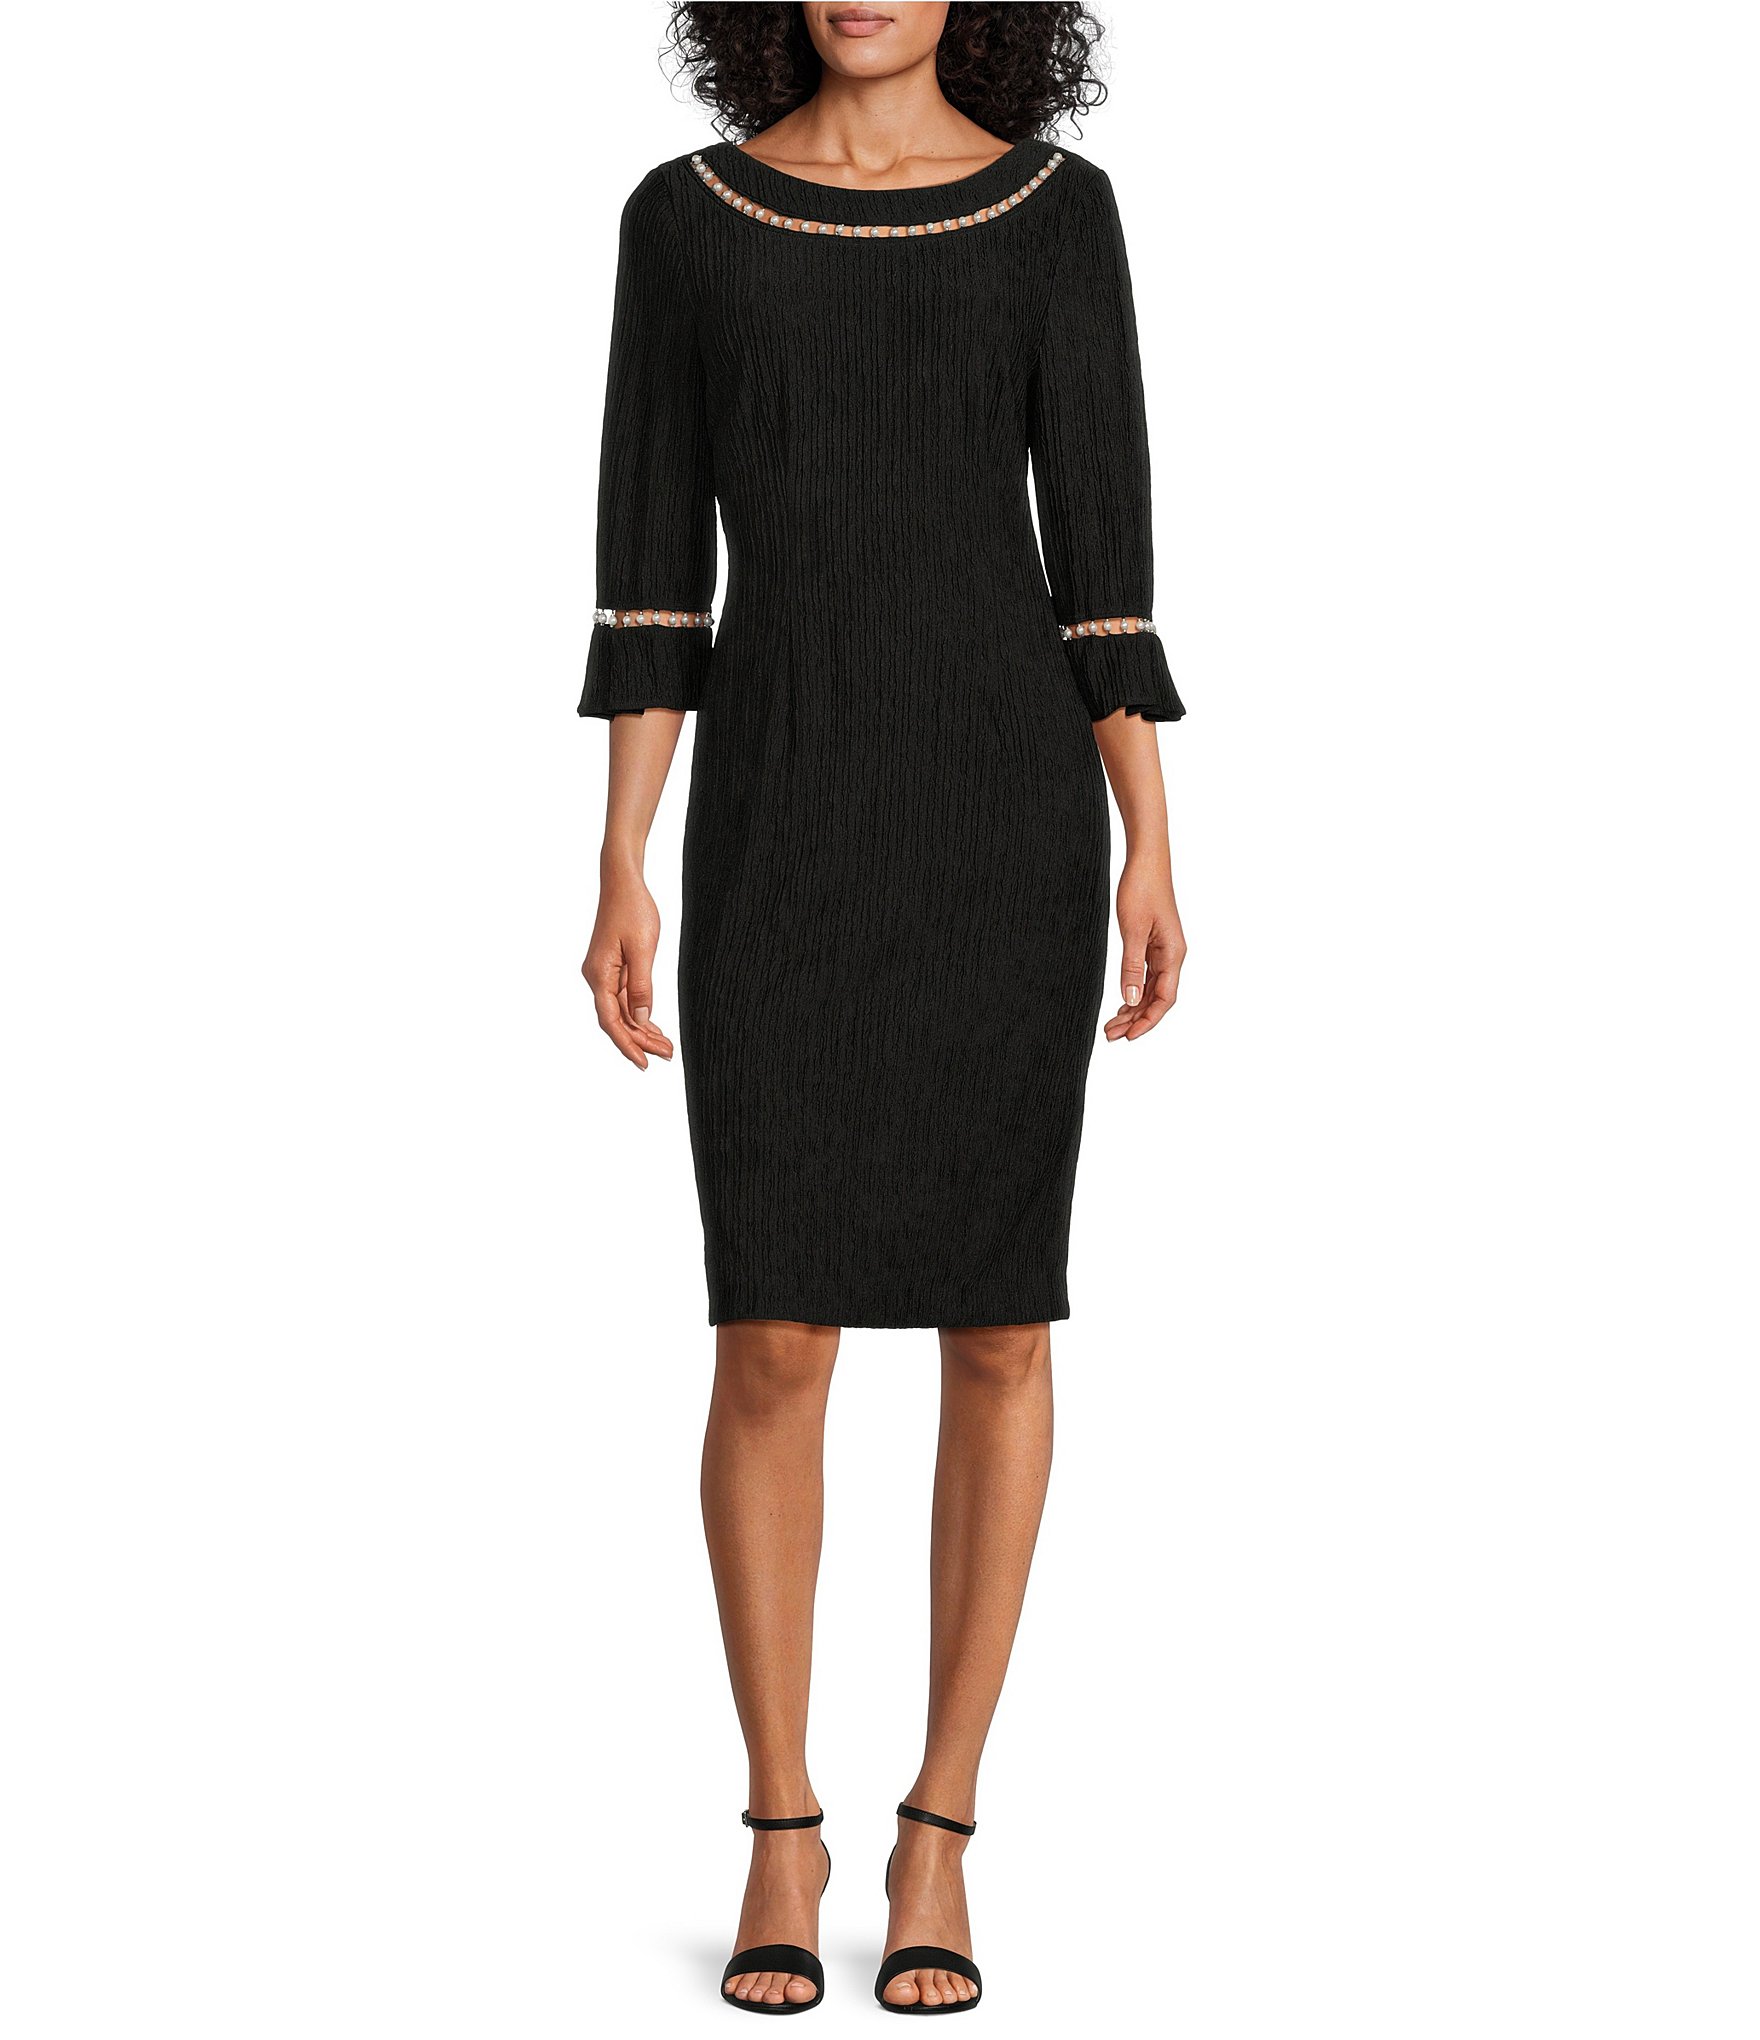 Le Bos 3/4 Bell Sleeve Round Neck Pearl Trim Crinkle Knit Dress | Dillard's